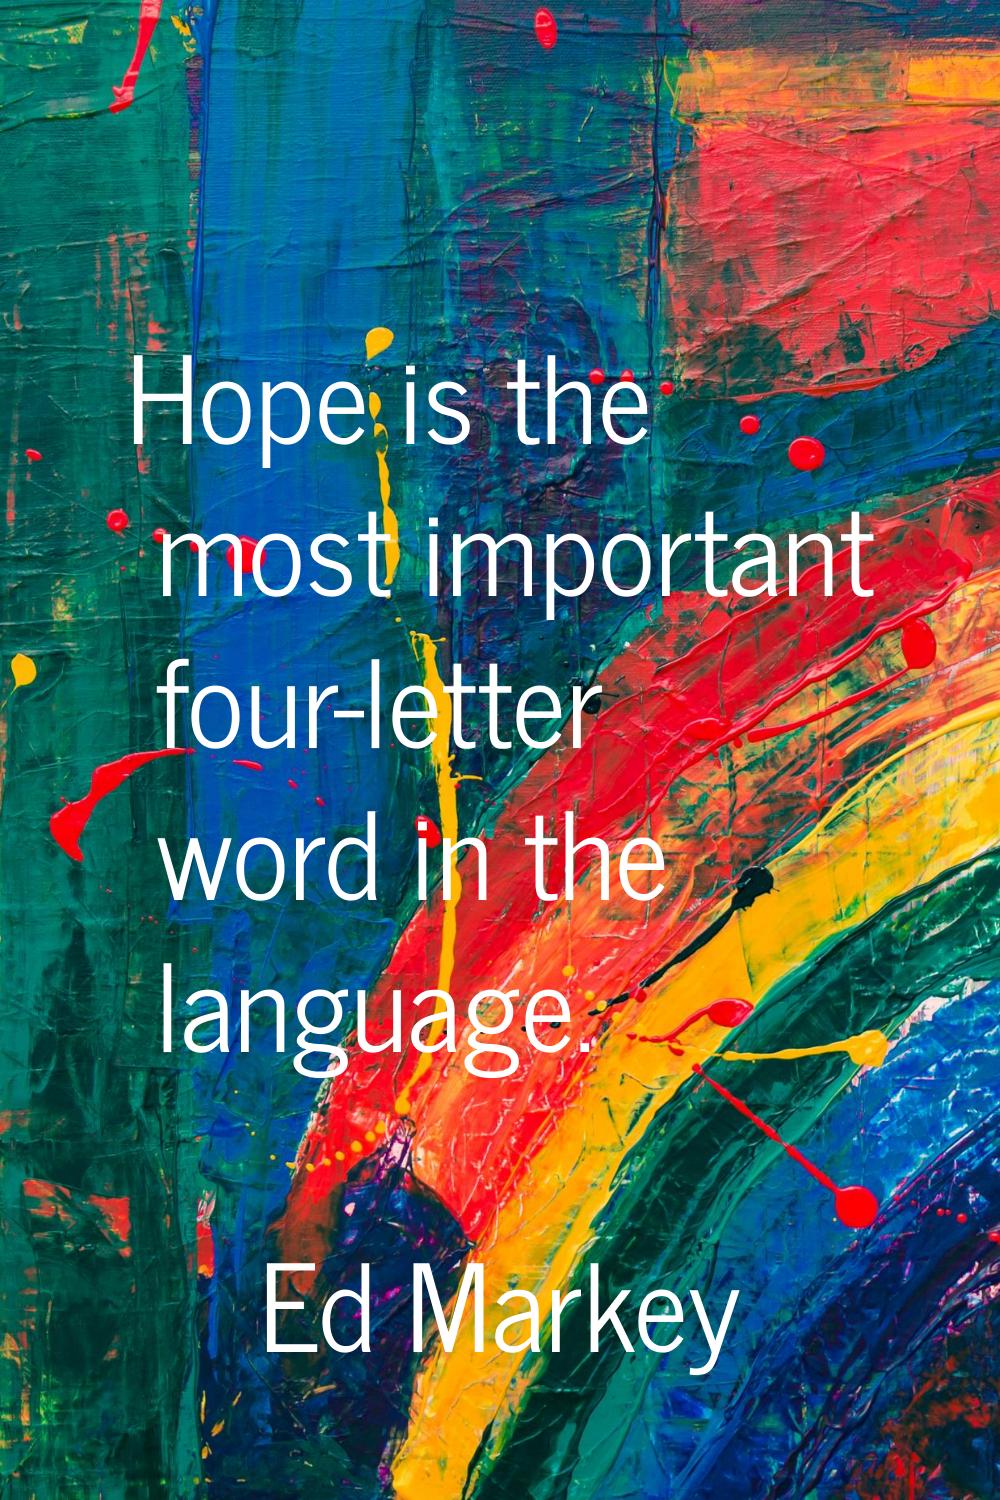 Hope is the most important four-letter word in the language.